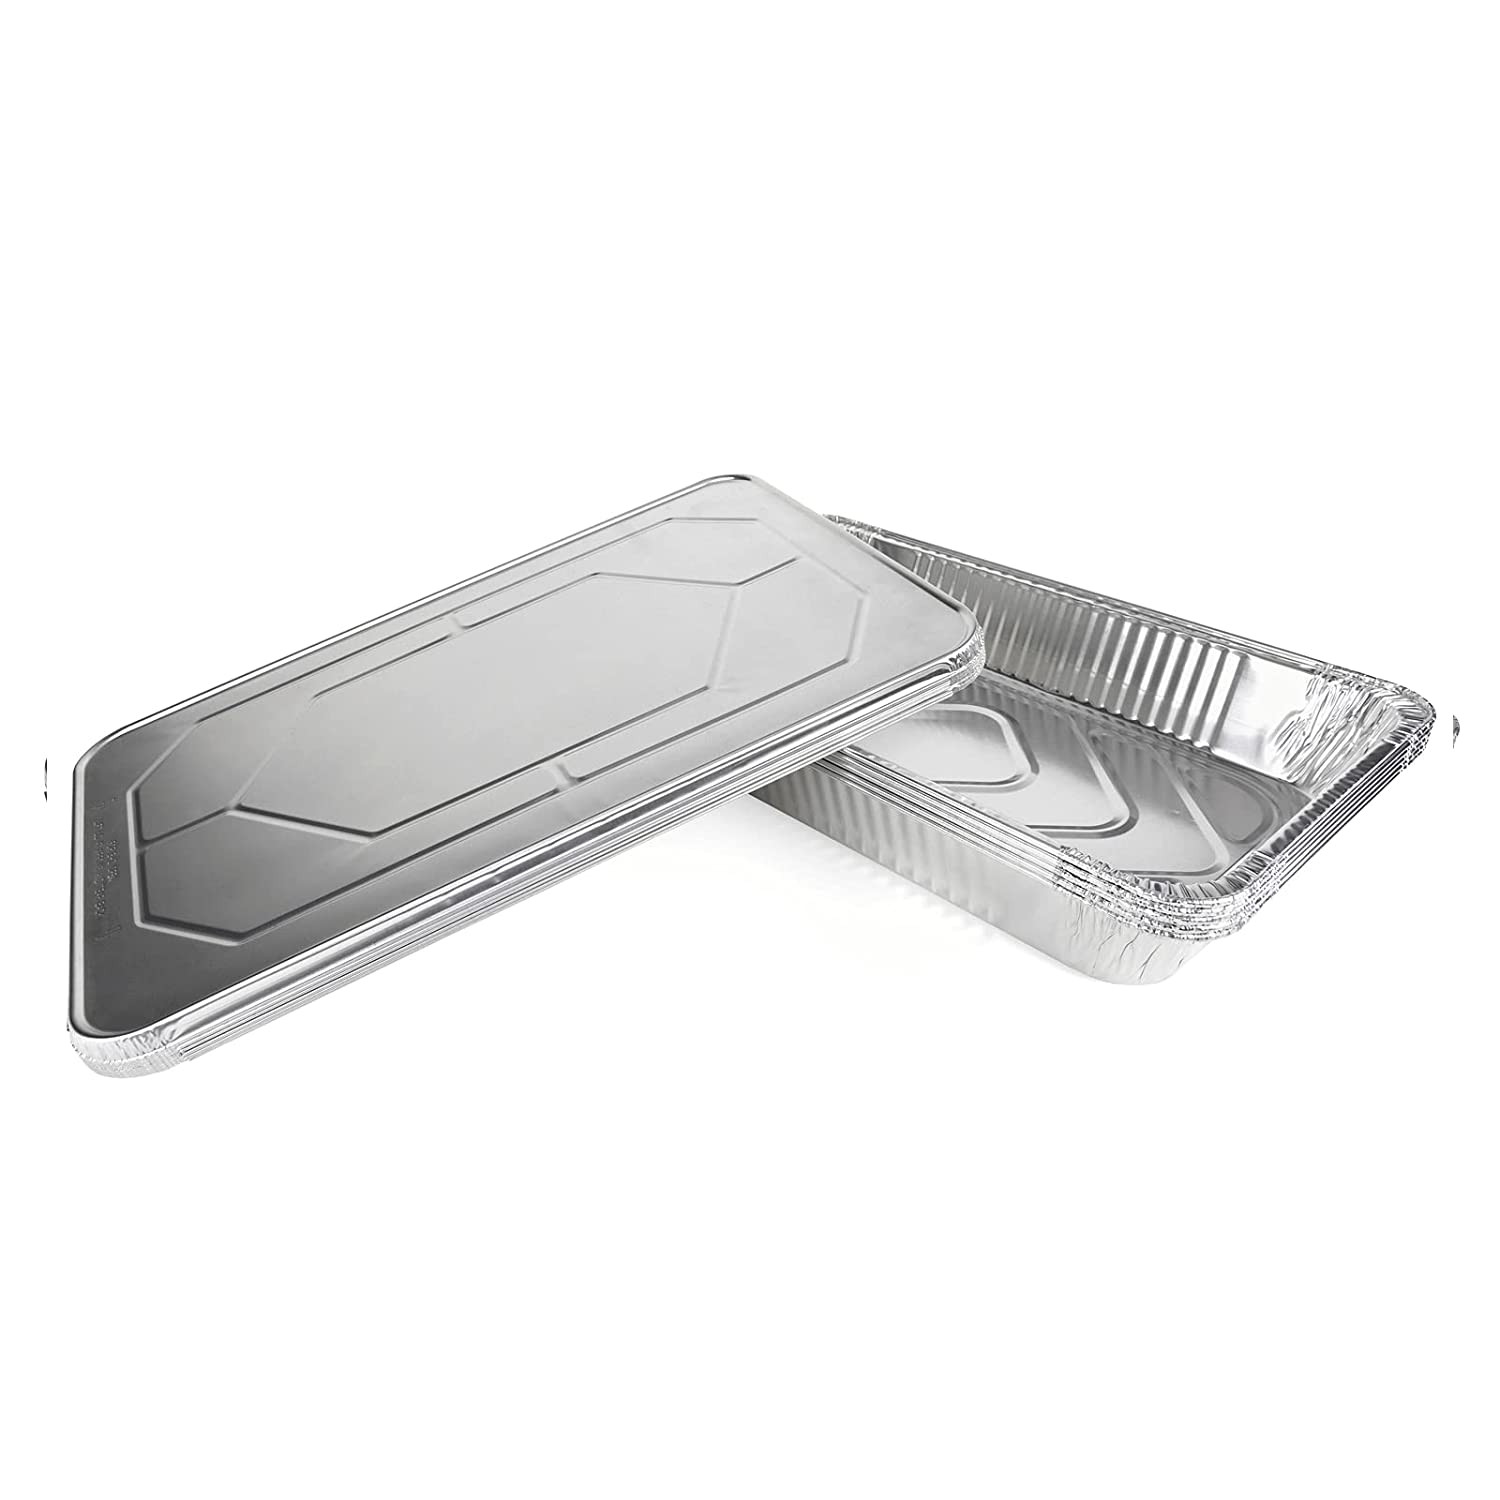 https://idlpack.com/image/cache/catalog/Products/Foil%20Pans%20and%20Trays/1deep-1500x1500.jpg